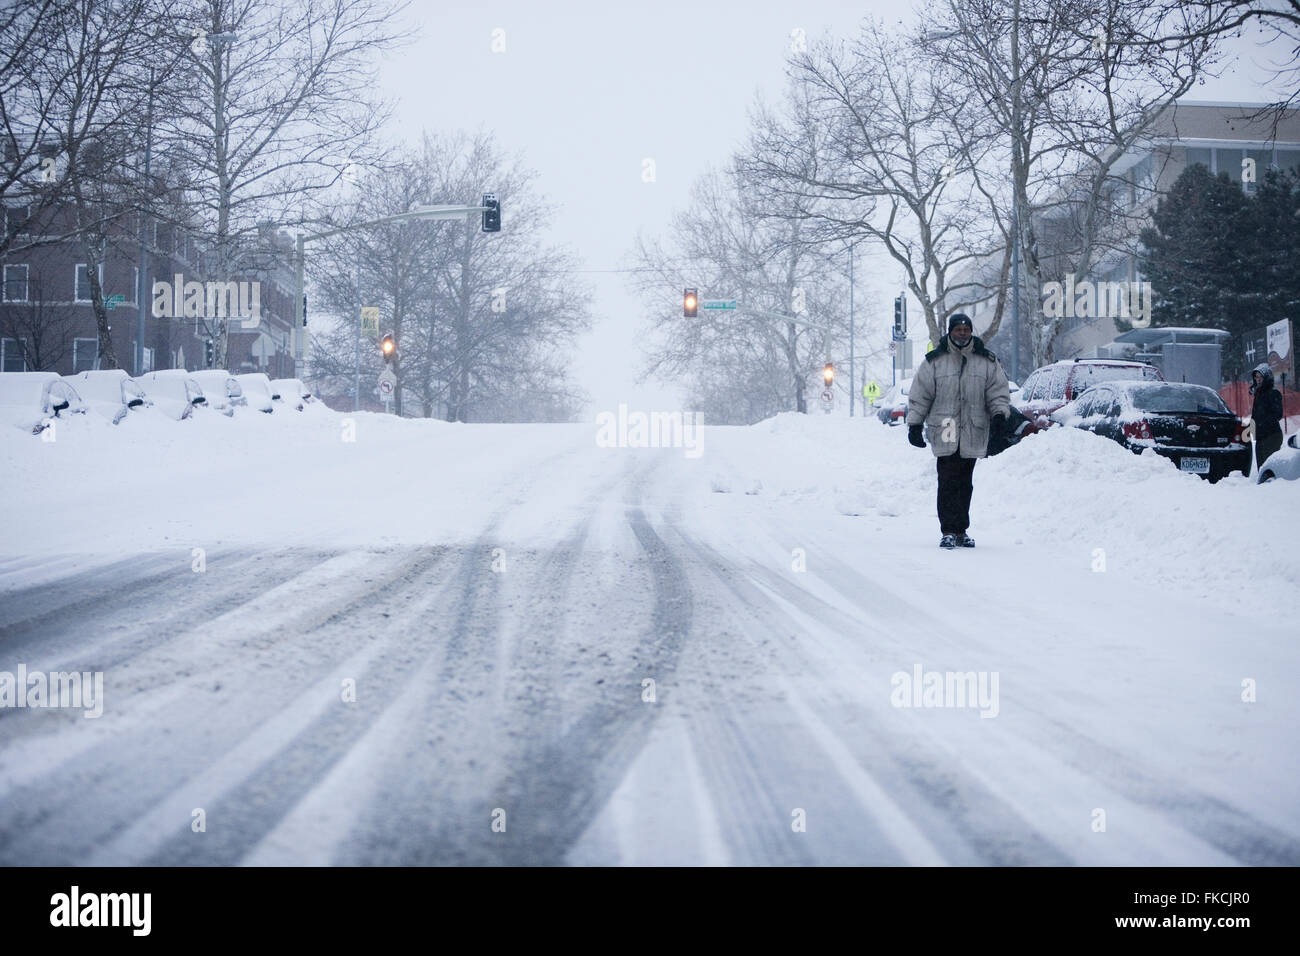 A man walking down a snowy road in Midtown Kansas City, Missouri after ...